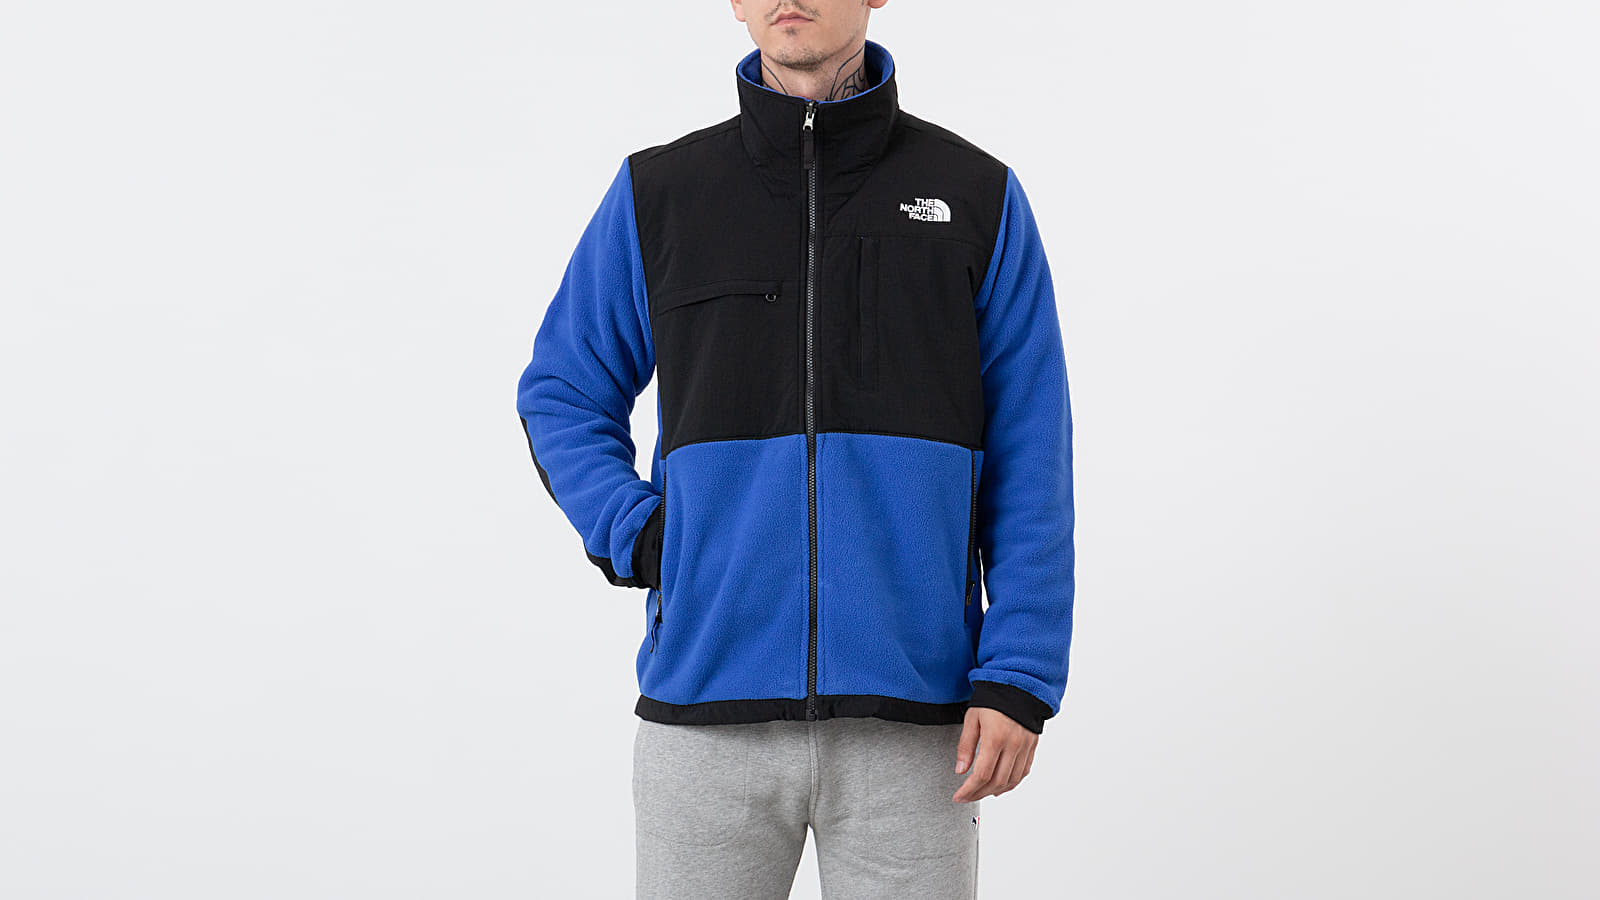 THE NORTH FACE Denali Fleece Jacket - Men's Recycled Cosmic Blue/Cosmic  Blue, S at  Men's Clothing store